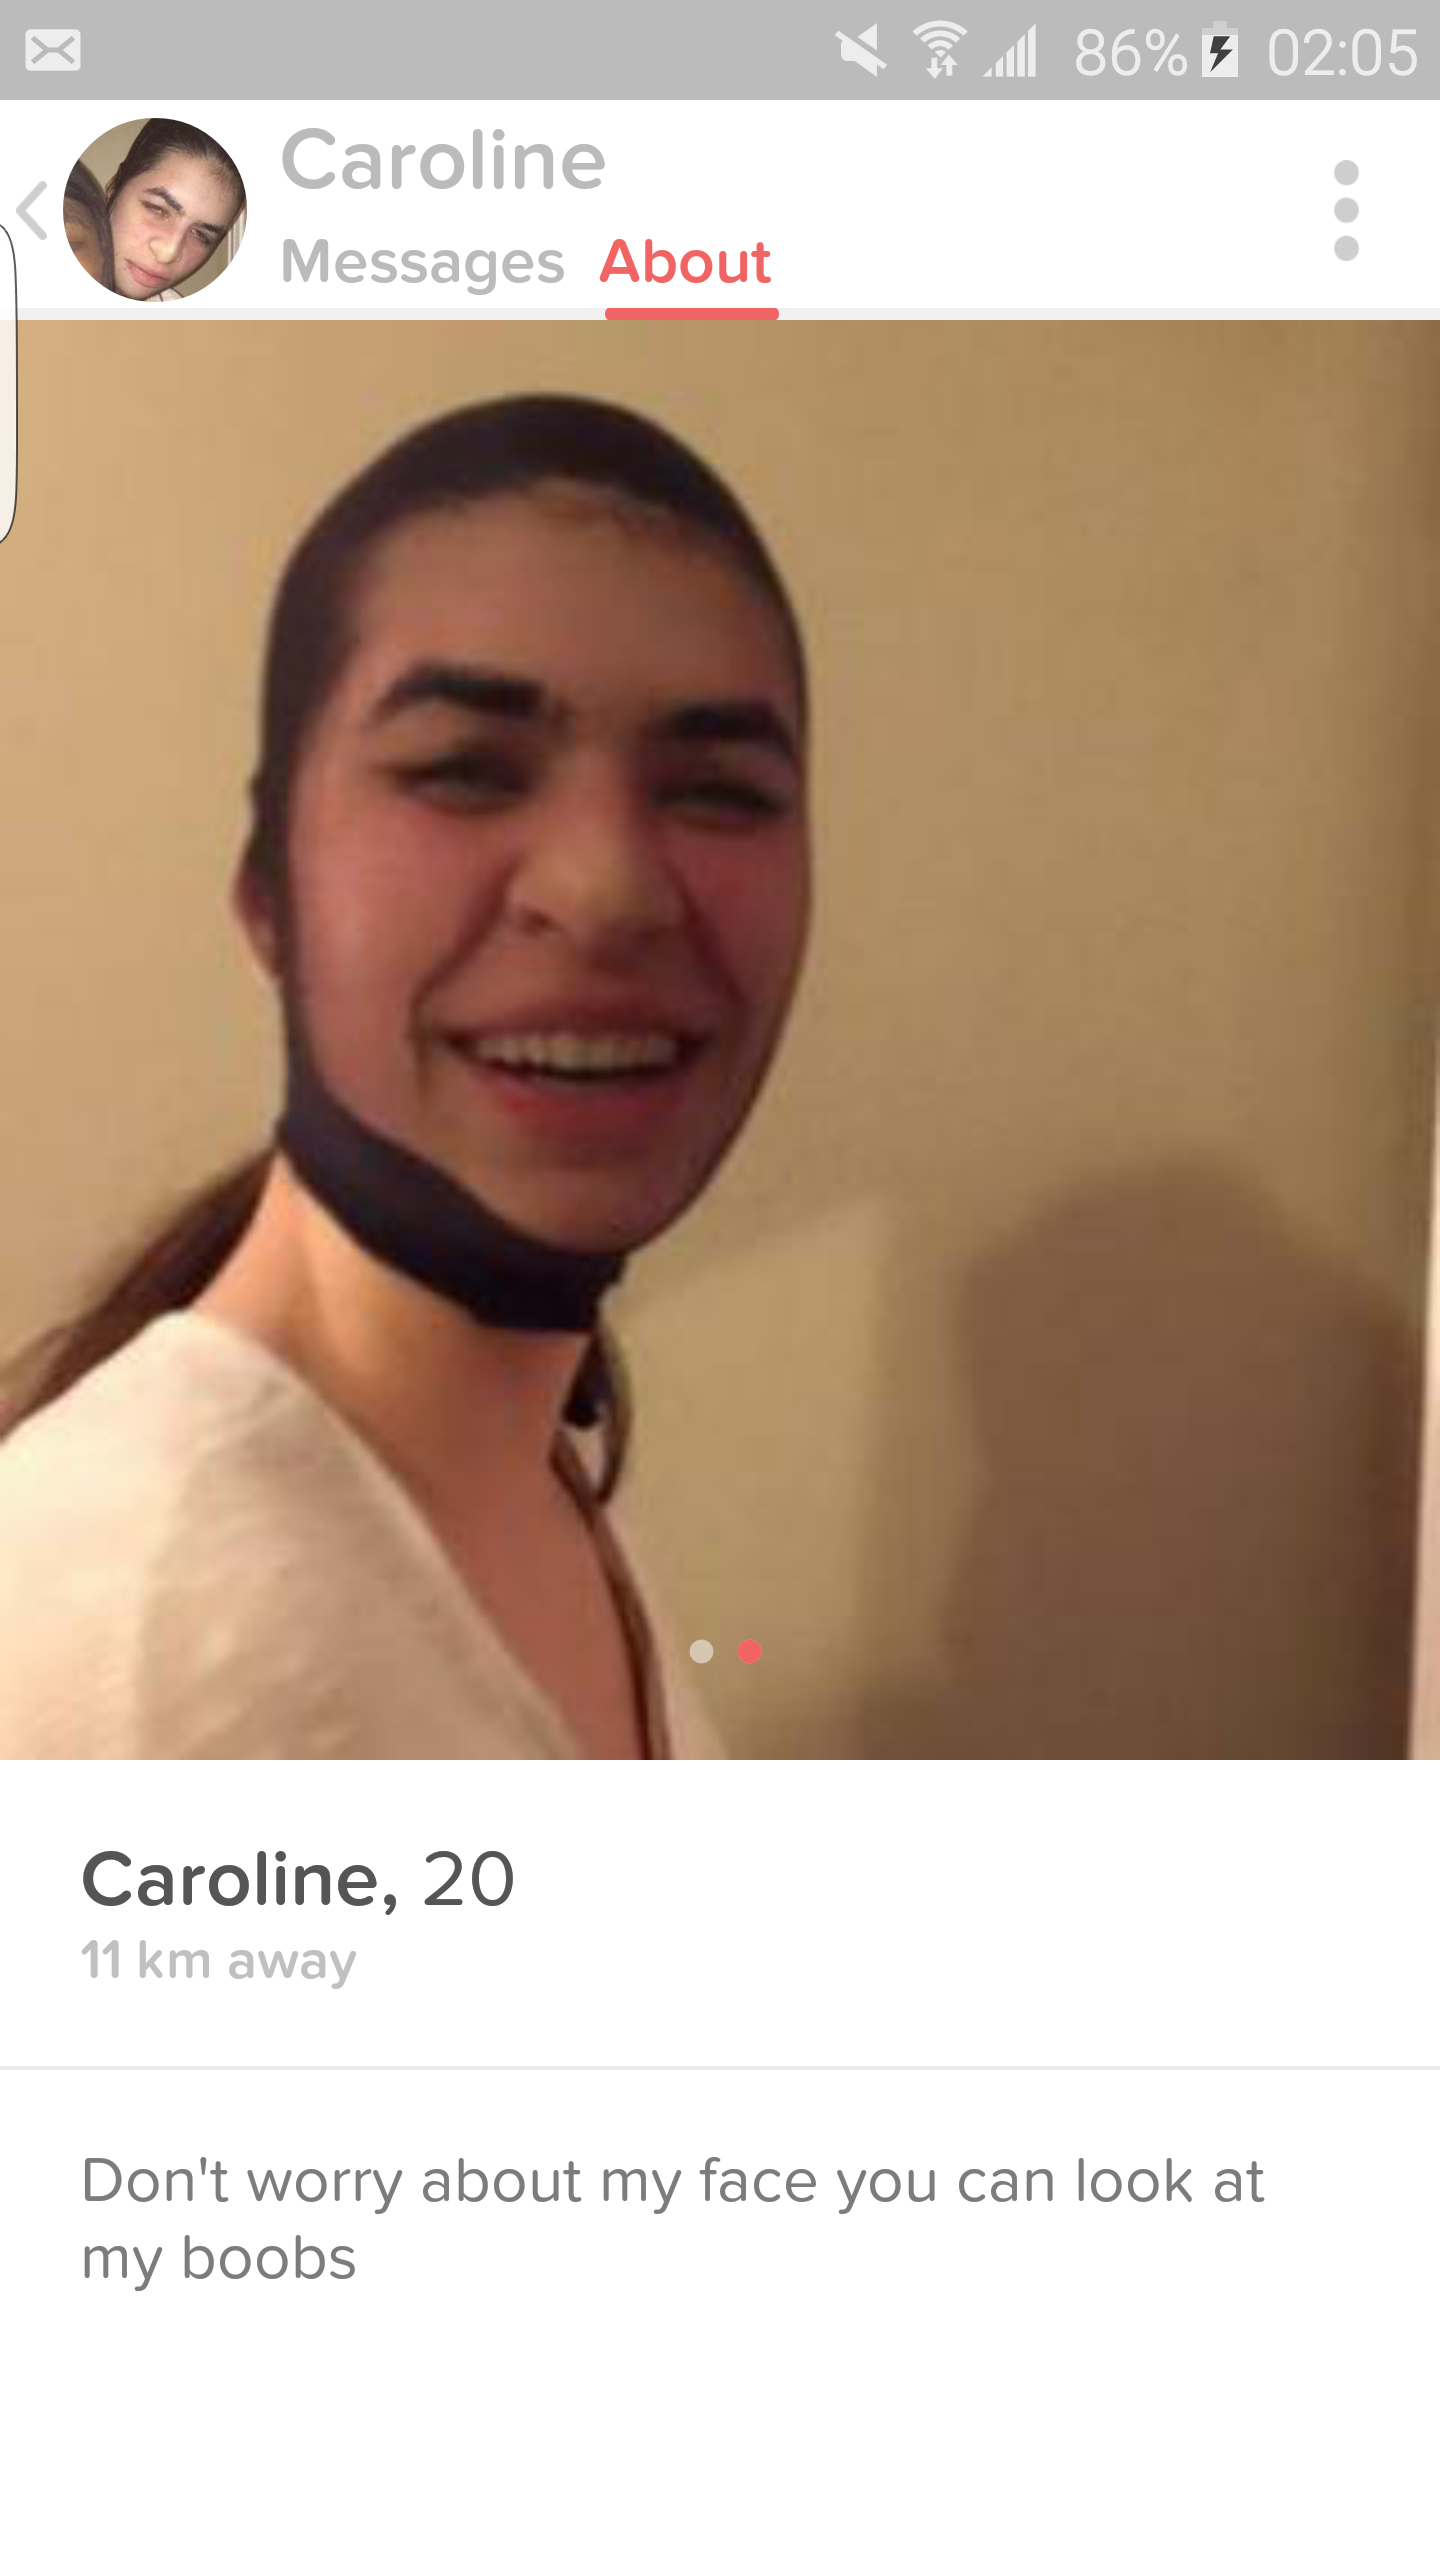 34 Intriguing People on Tinder